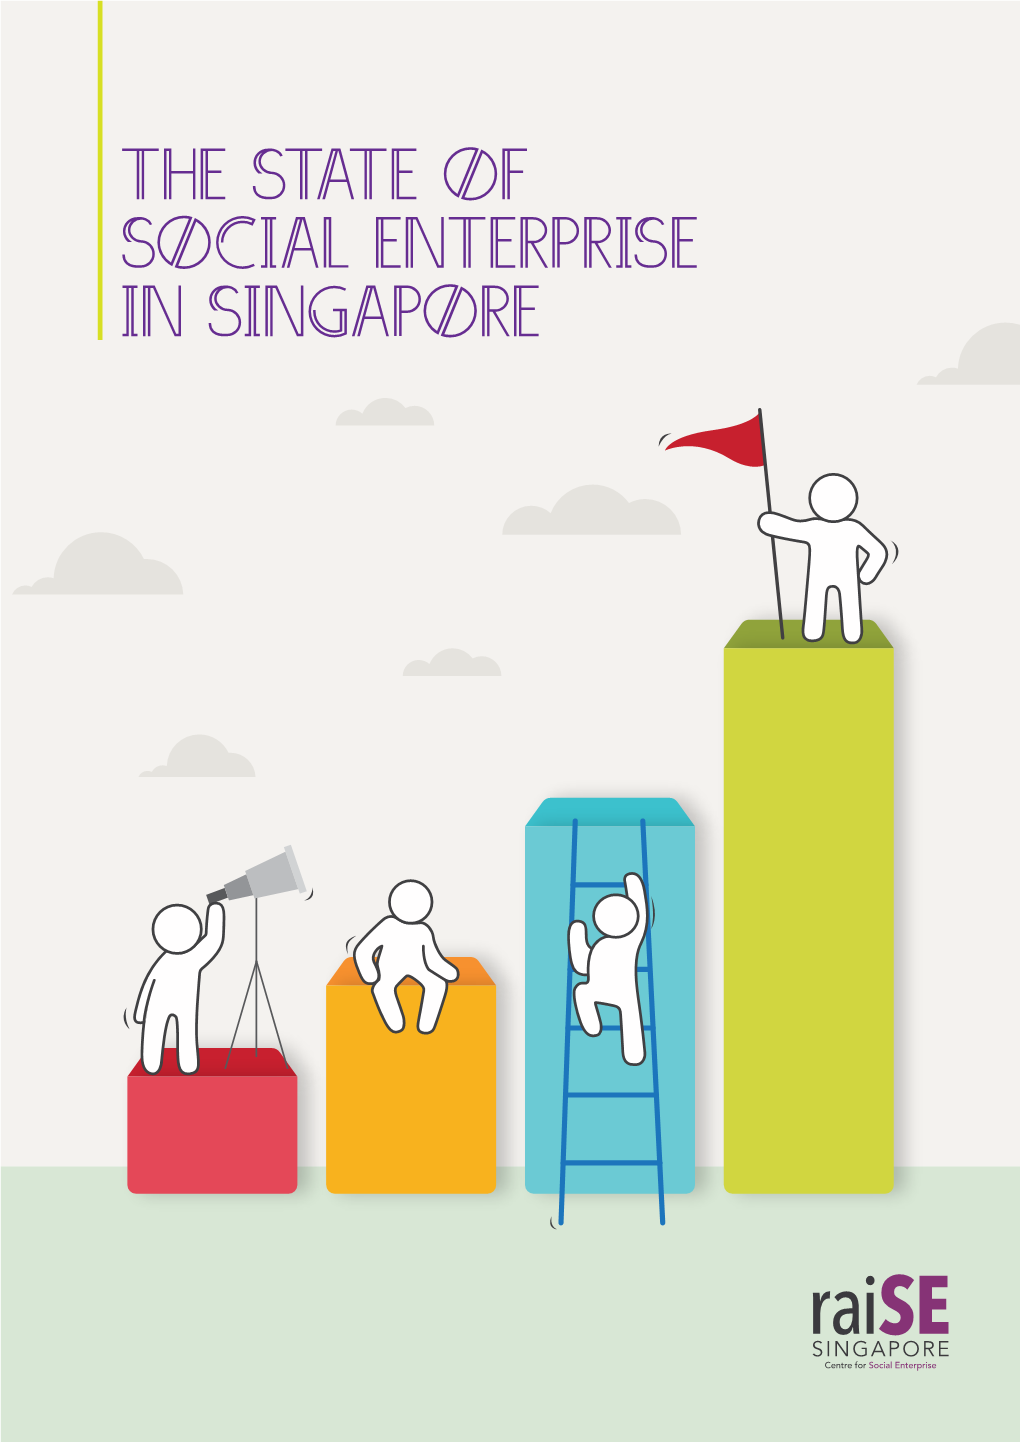 The State of Social Enterprise in Singapore